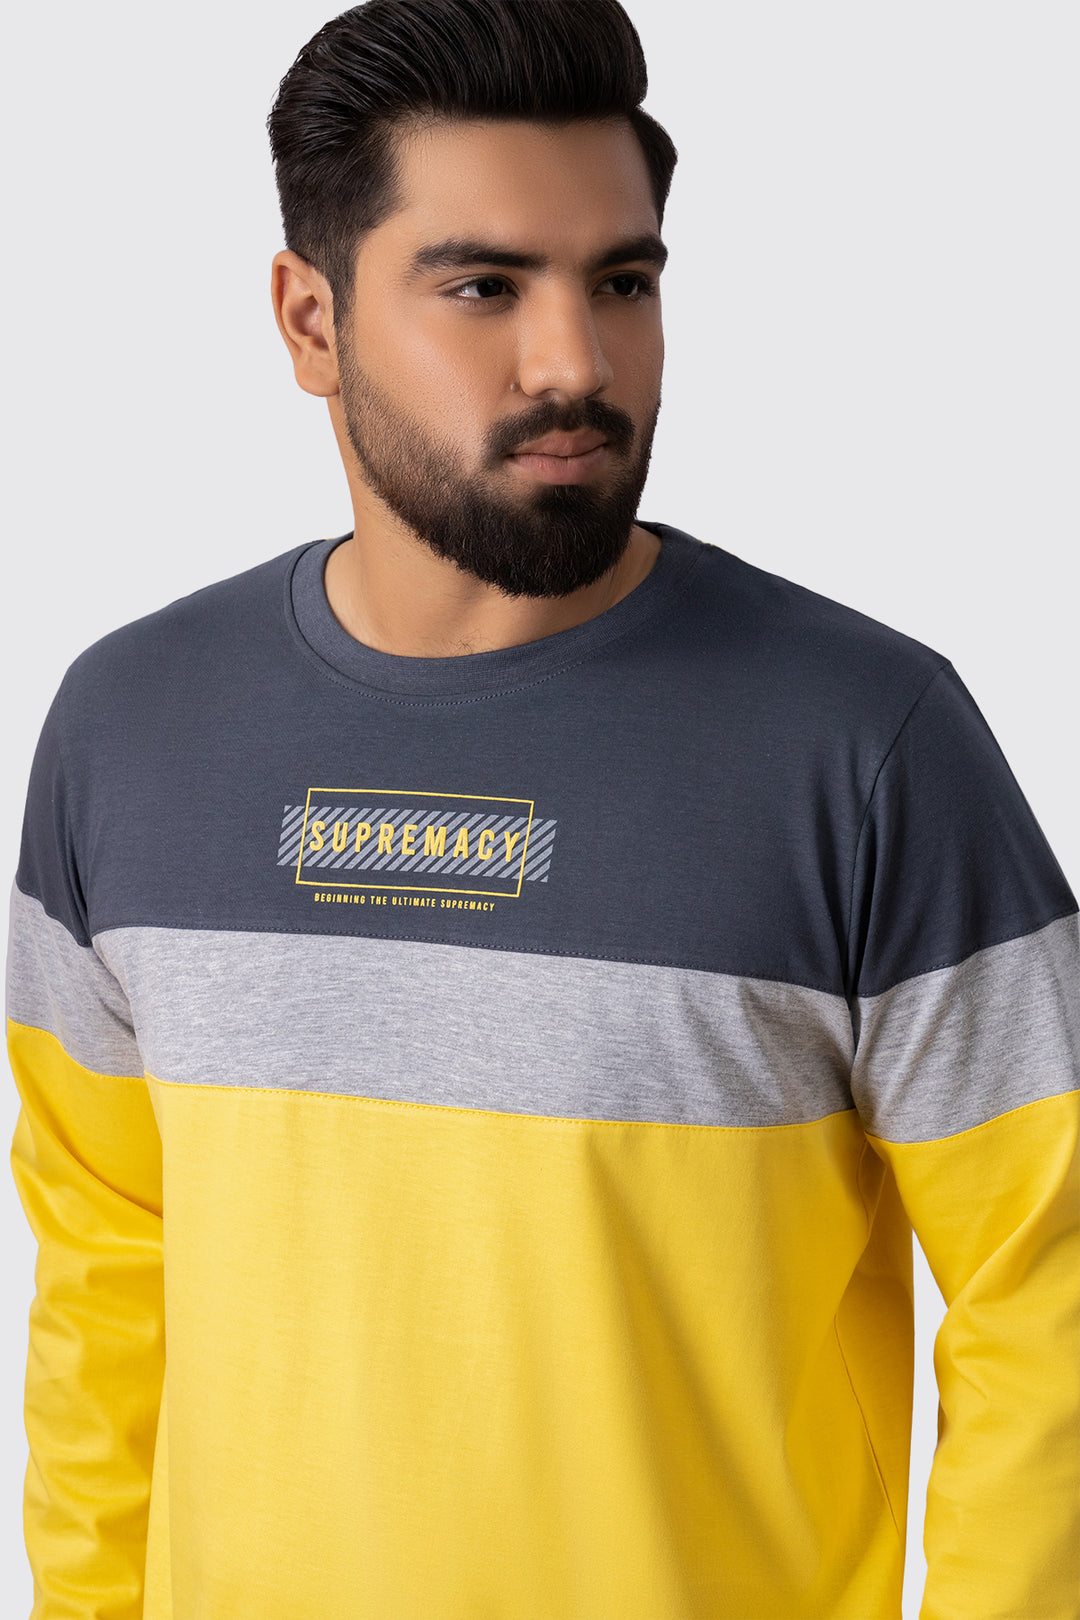 Supremacy Tri-Color Full Sleeve T-Shirt (Plus Size) - W23 - MT0300P